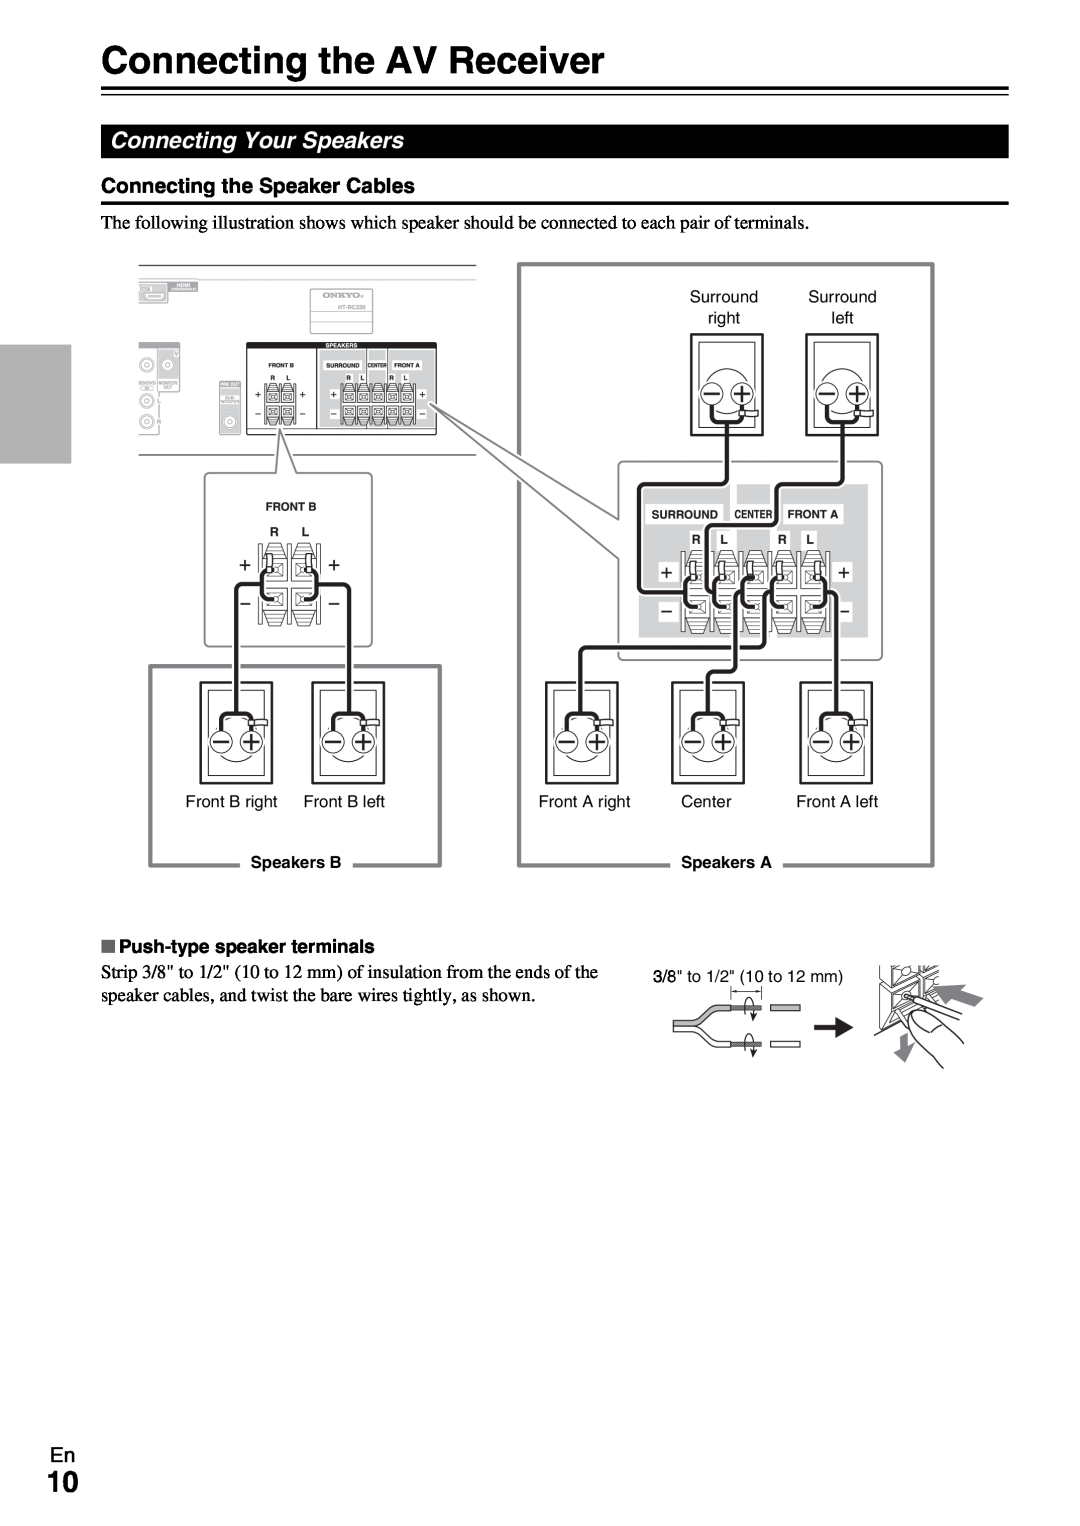 Onkyo HT-RC330 instruction manual Connecting the AV Receiver, Connecting Your Speakers, Connecting the Speaker Cables 